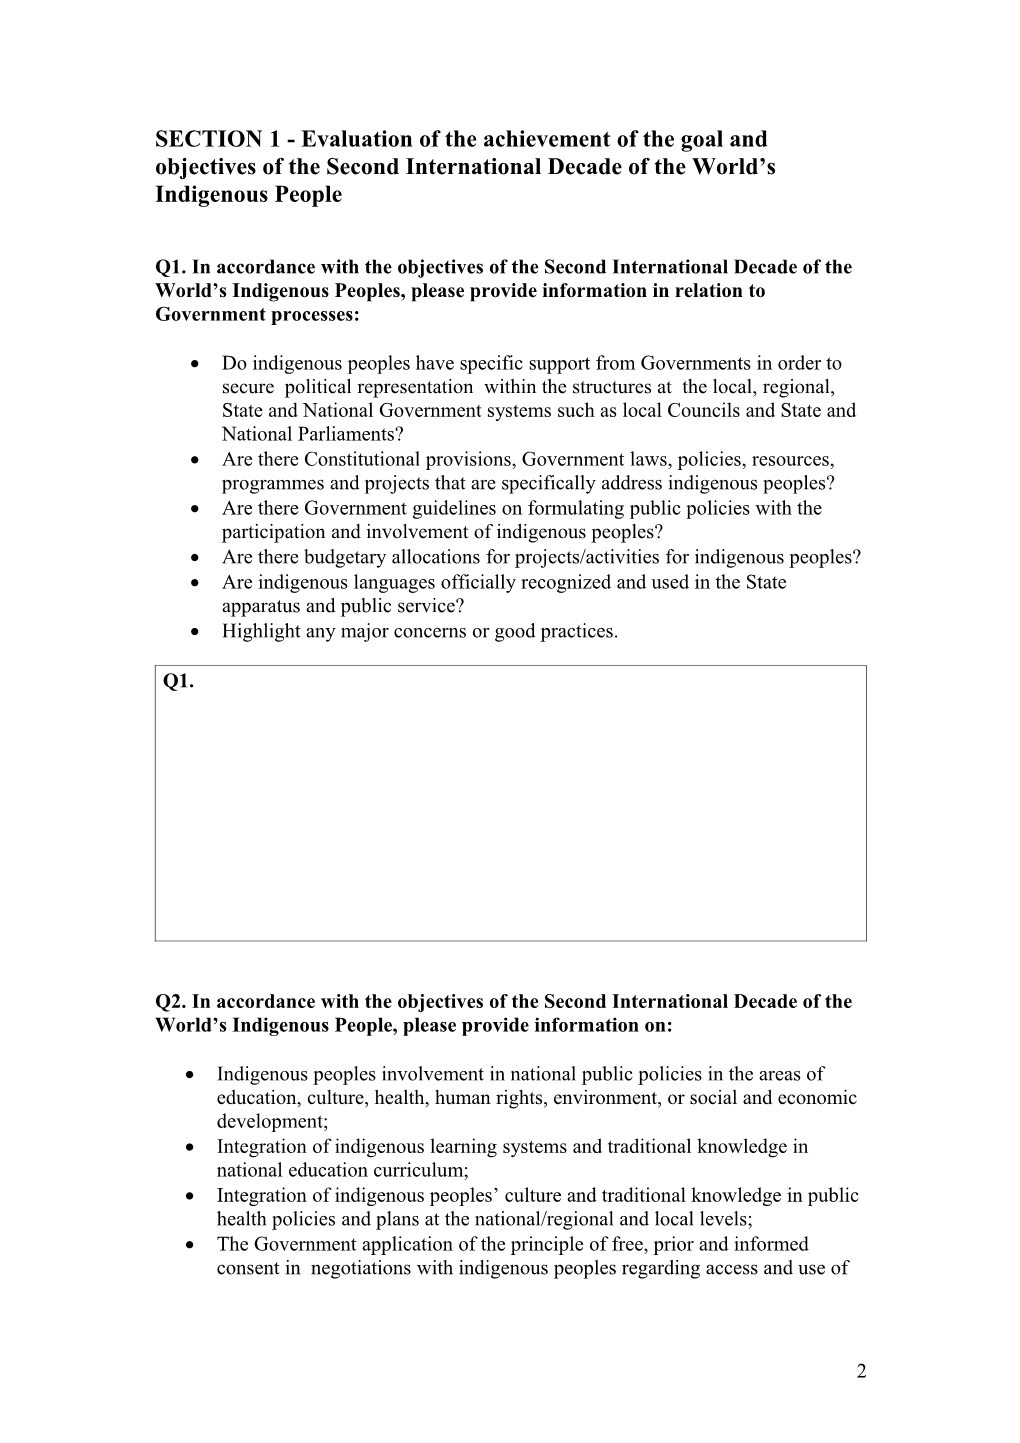 Questionnaire for Indigenous Peoples Organizations and Other Civil Society Organizations